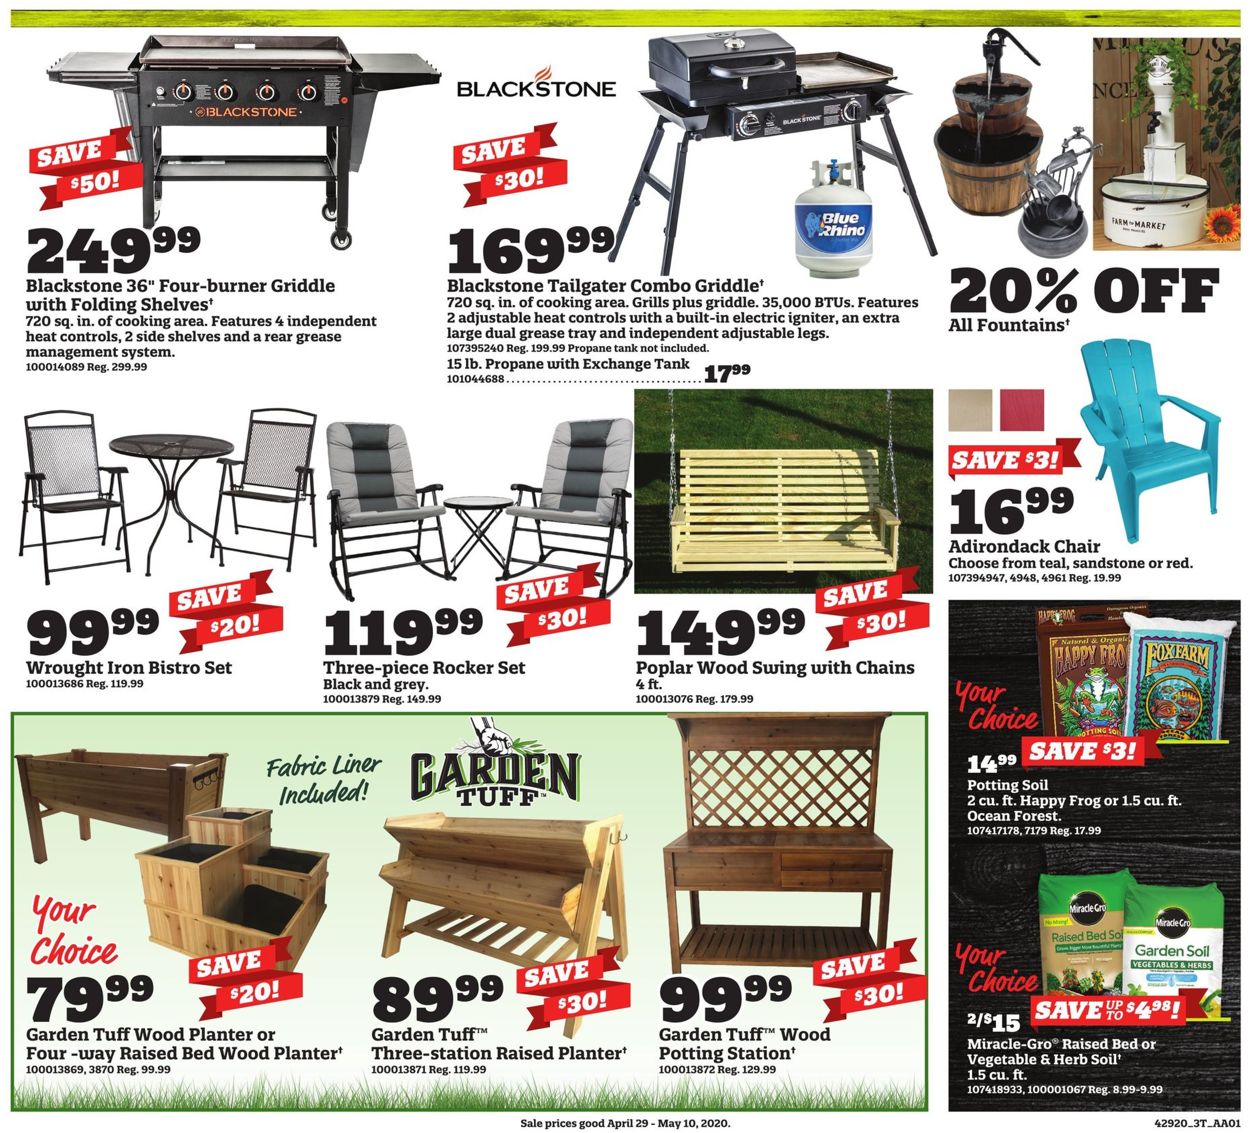 Orscheln Farm and Home Ad from 04/29/2020